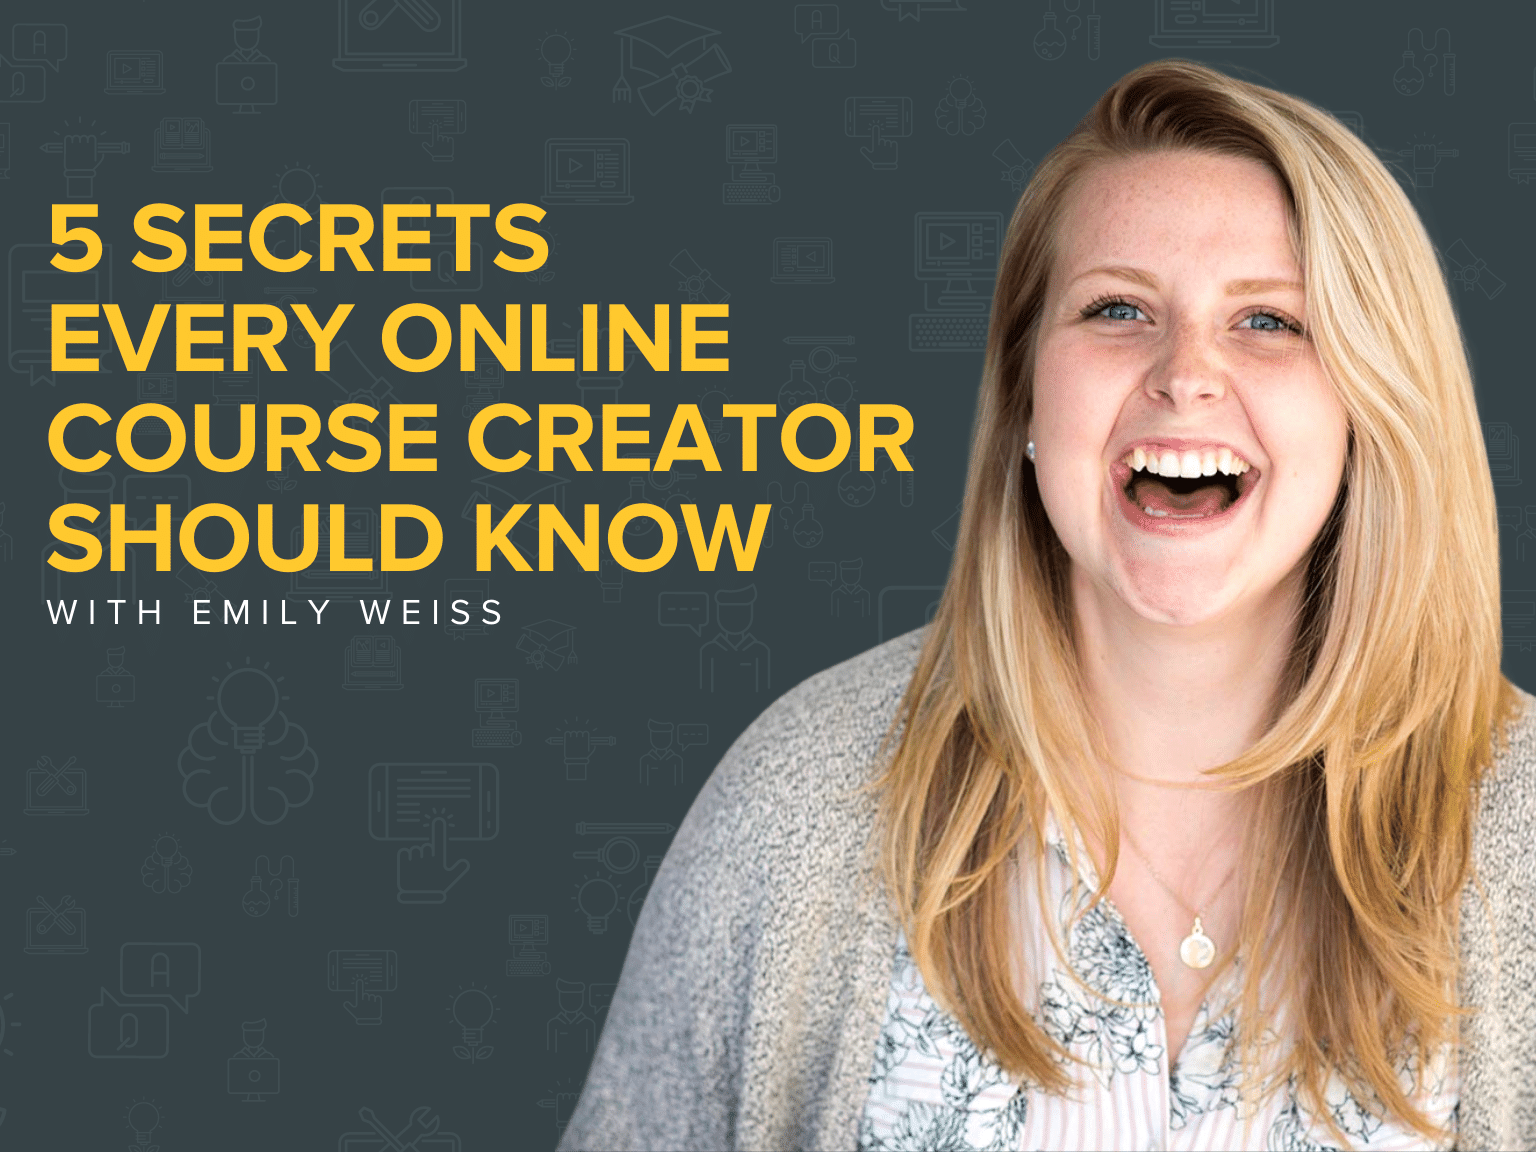 5 Secrets Every Online Course Creator Should Know With Emily Weiss